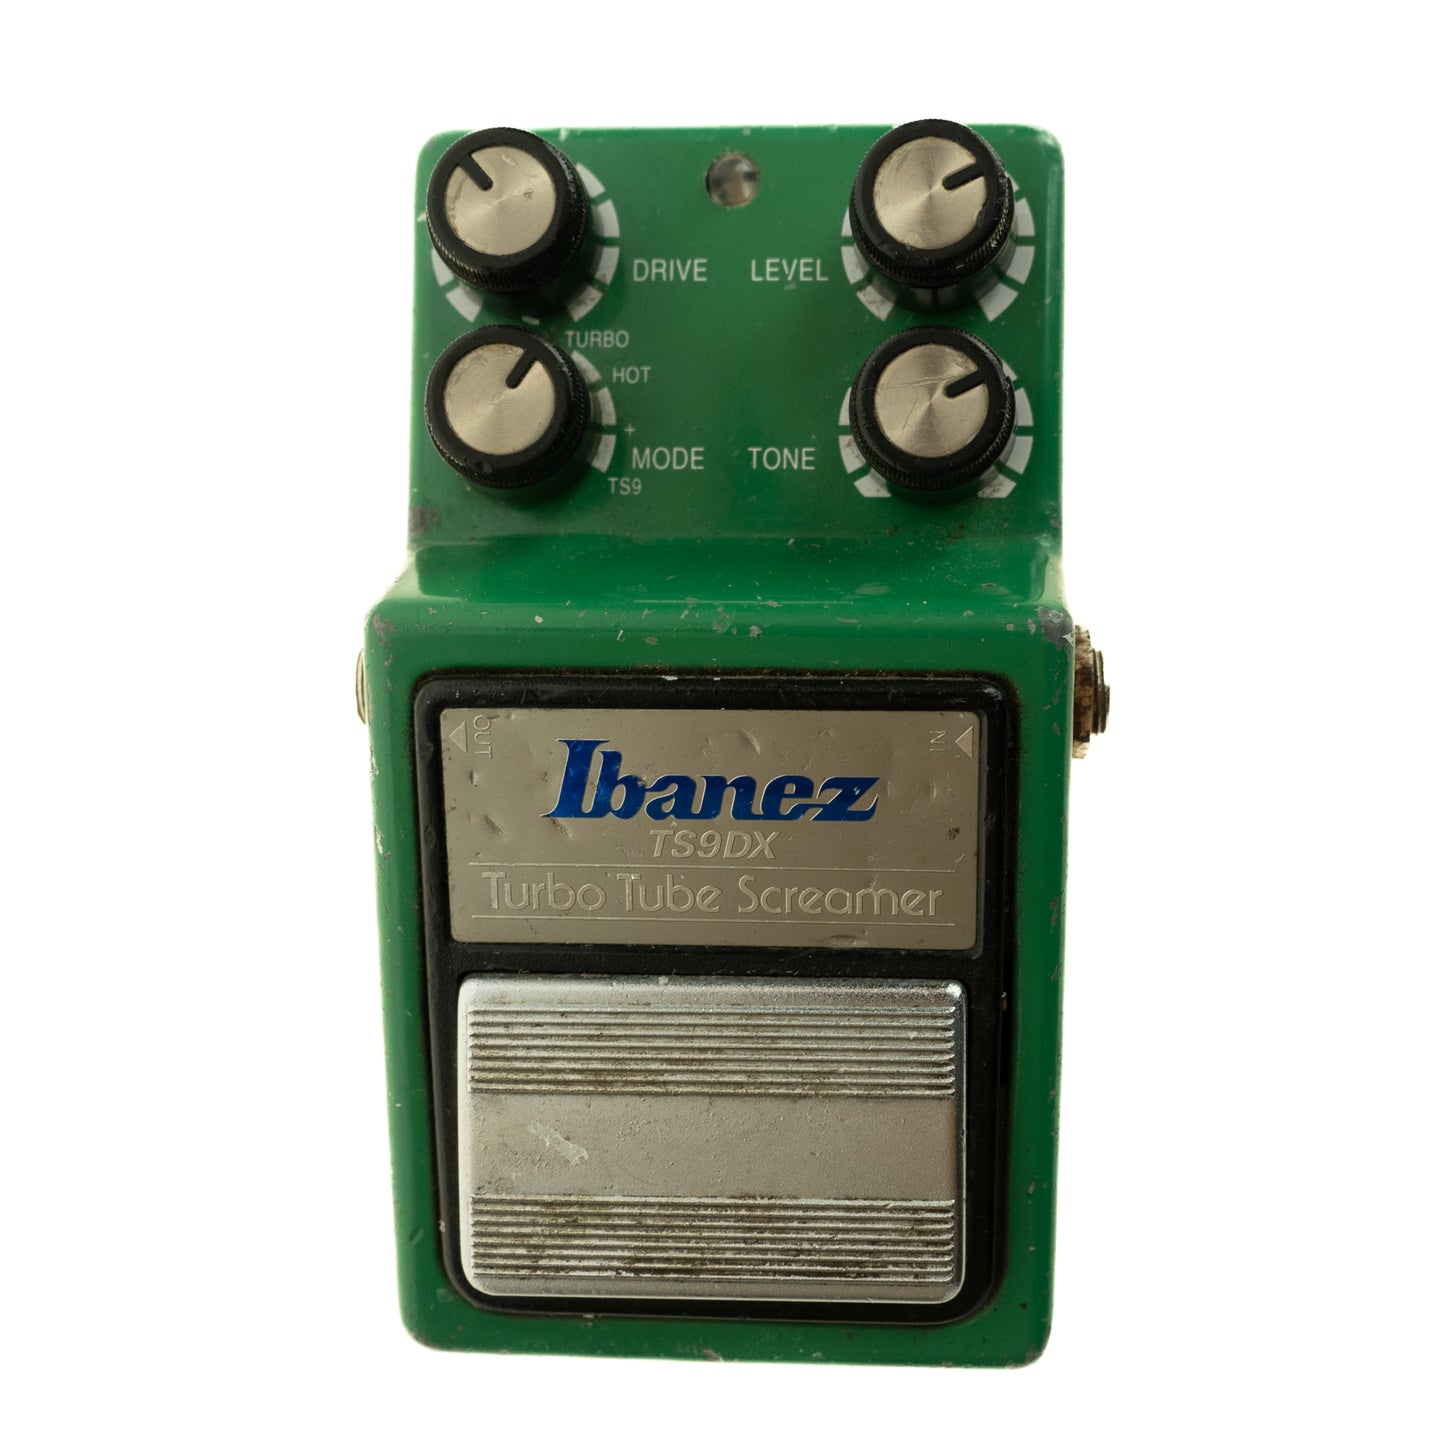 Ibanez TS9DX Turbo Tube Screamer overdrive guitar effects pedal